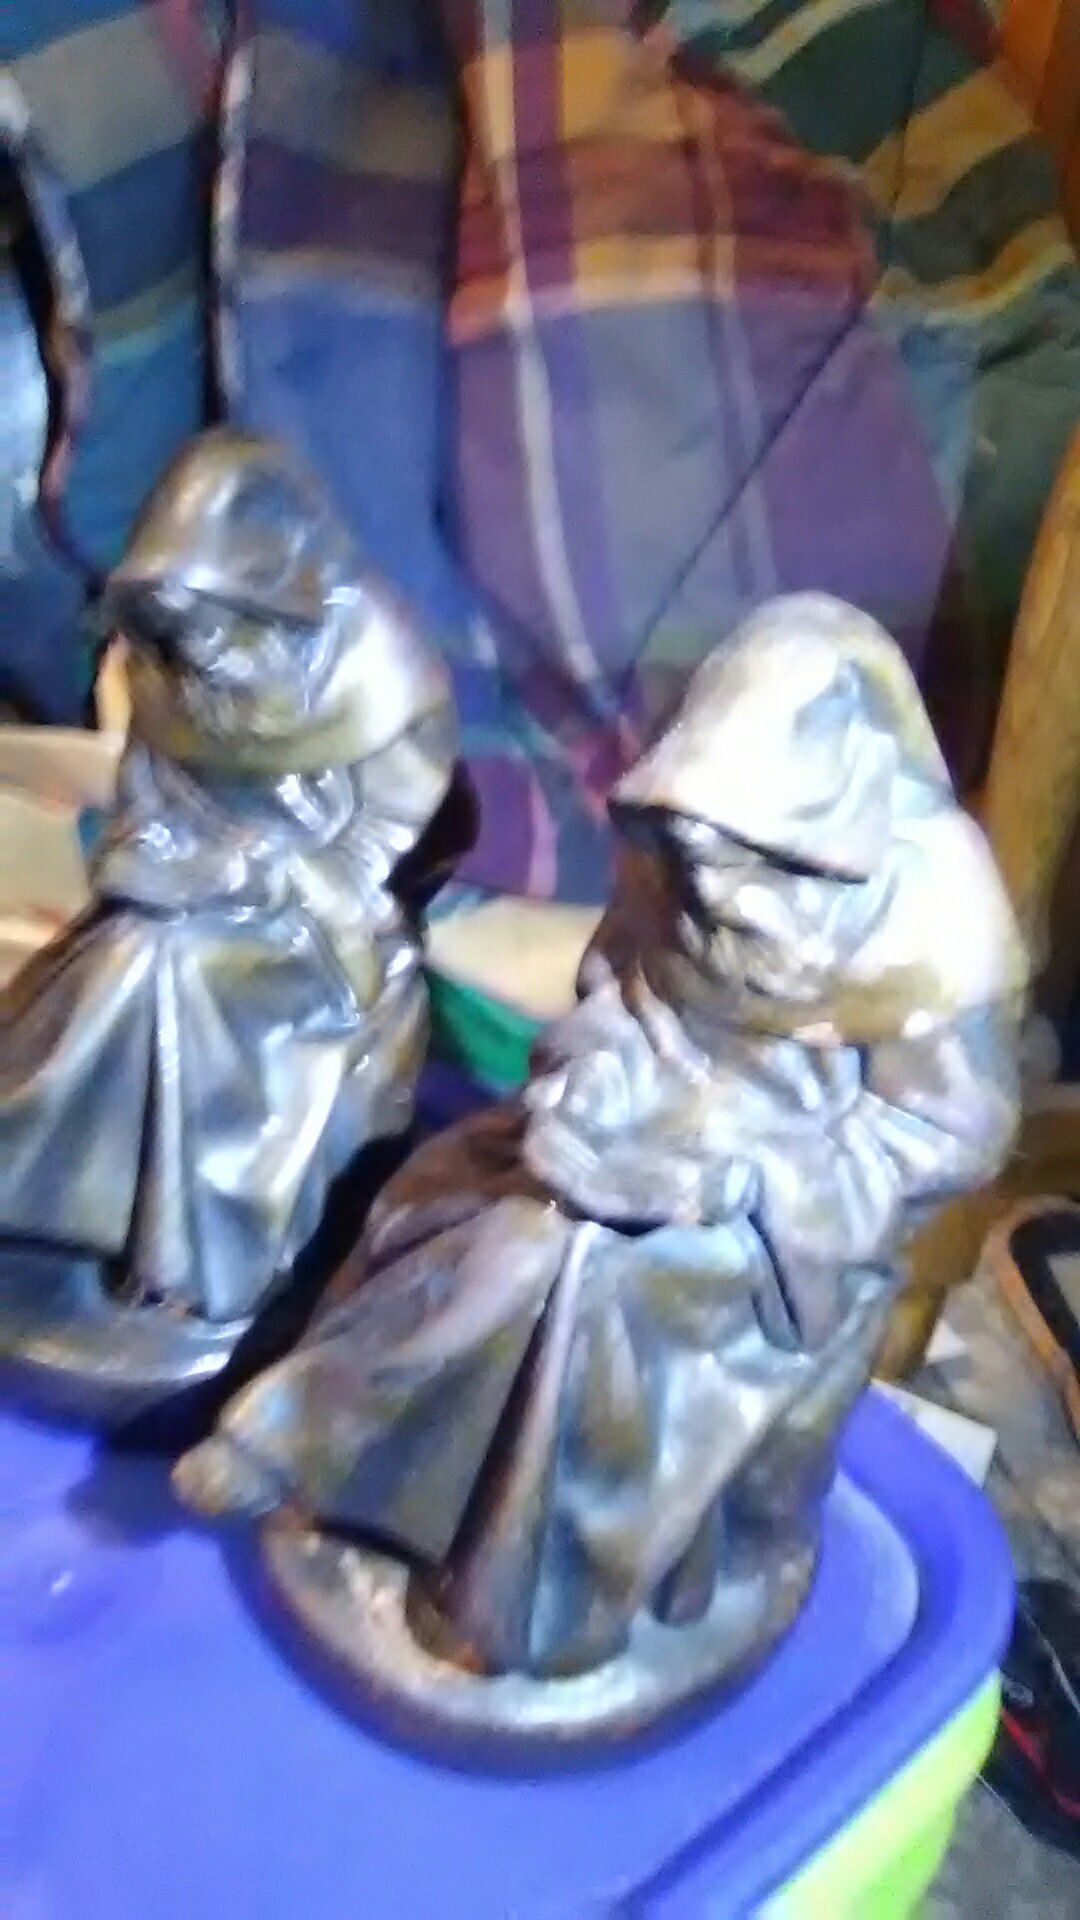 Vintage Reading Monk Bookends from the 1920s.